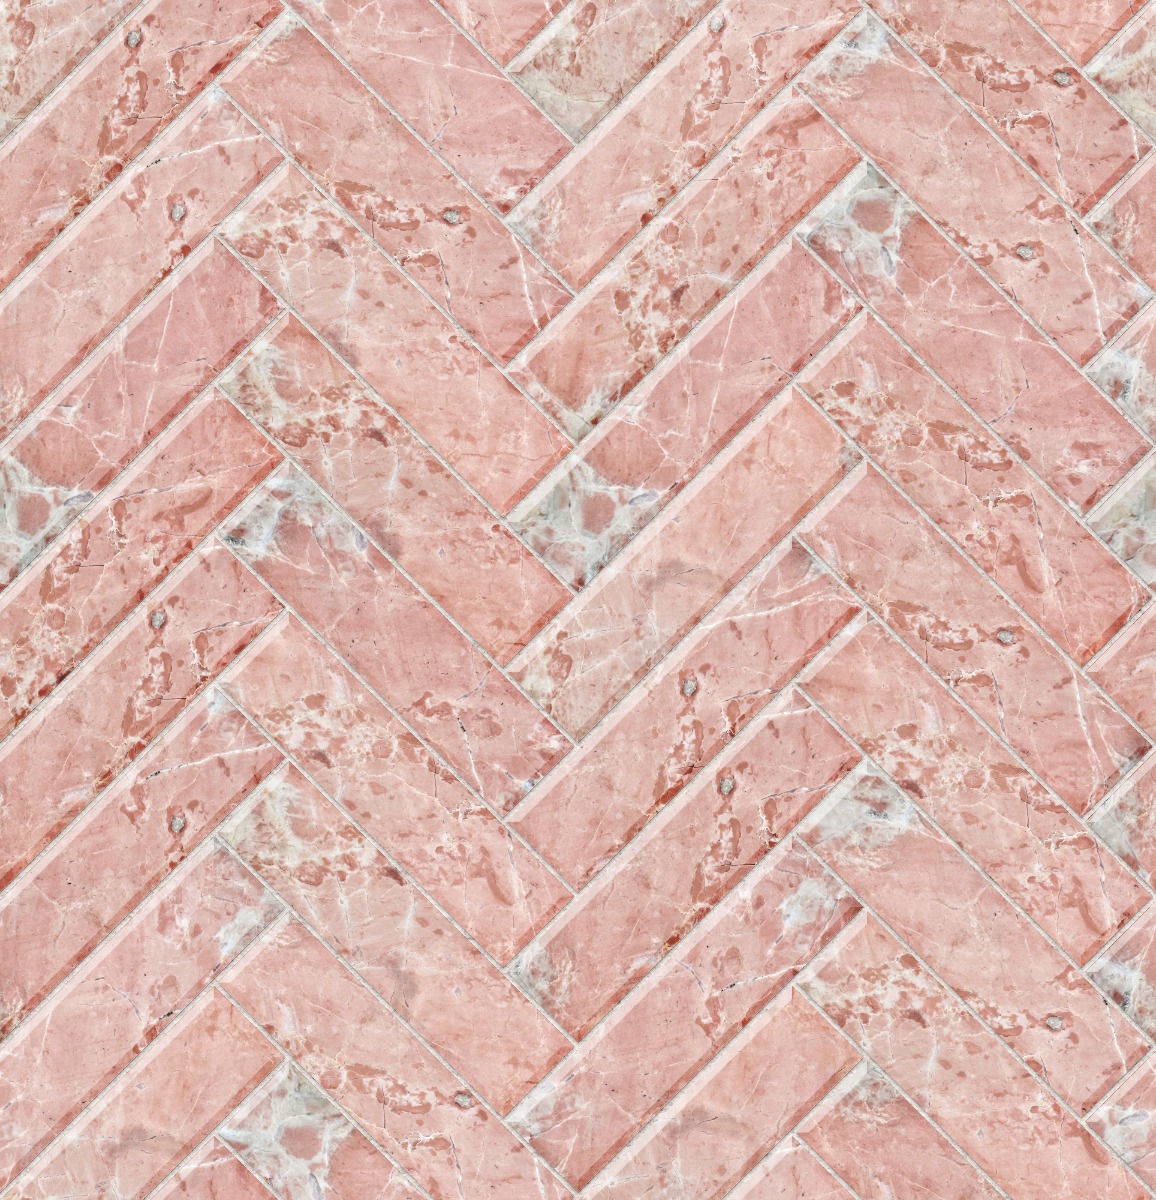 A seamless stone texture with pink marble blocks arranged in a Herringbone pattern